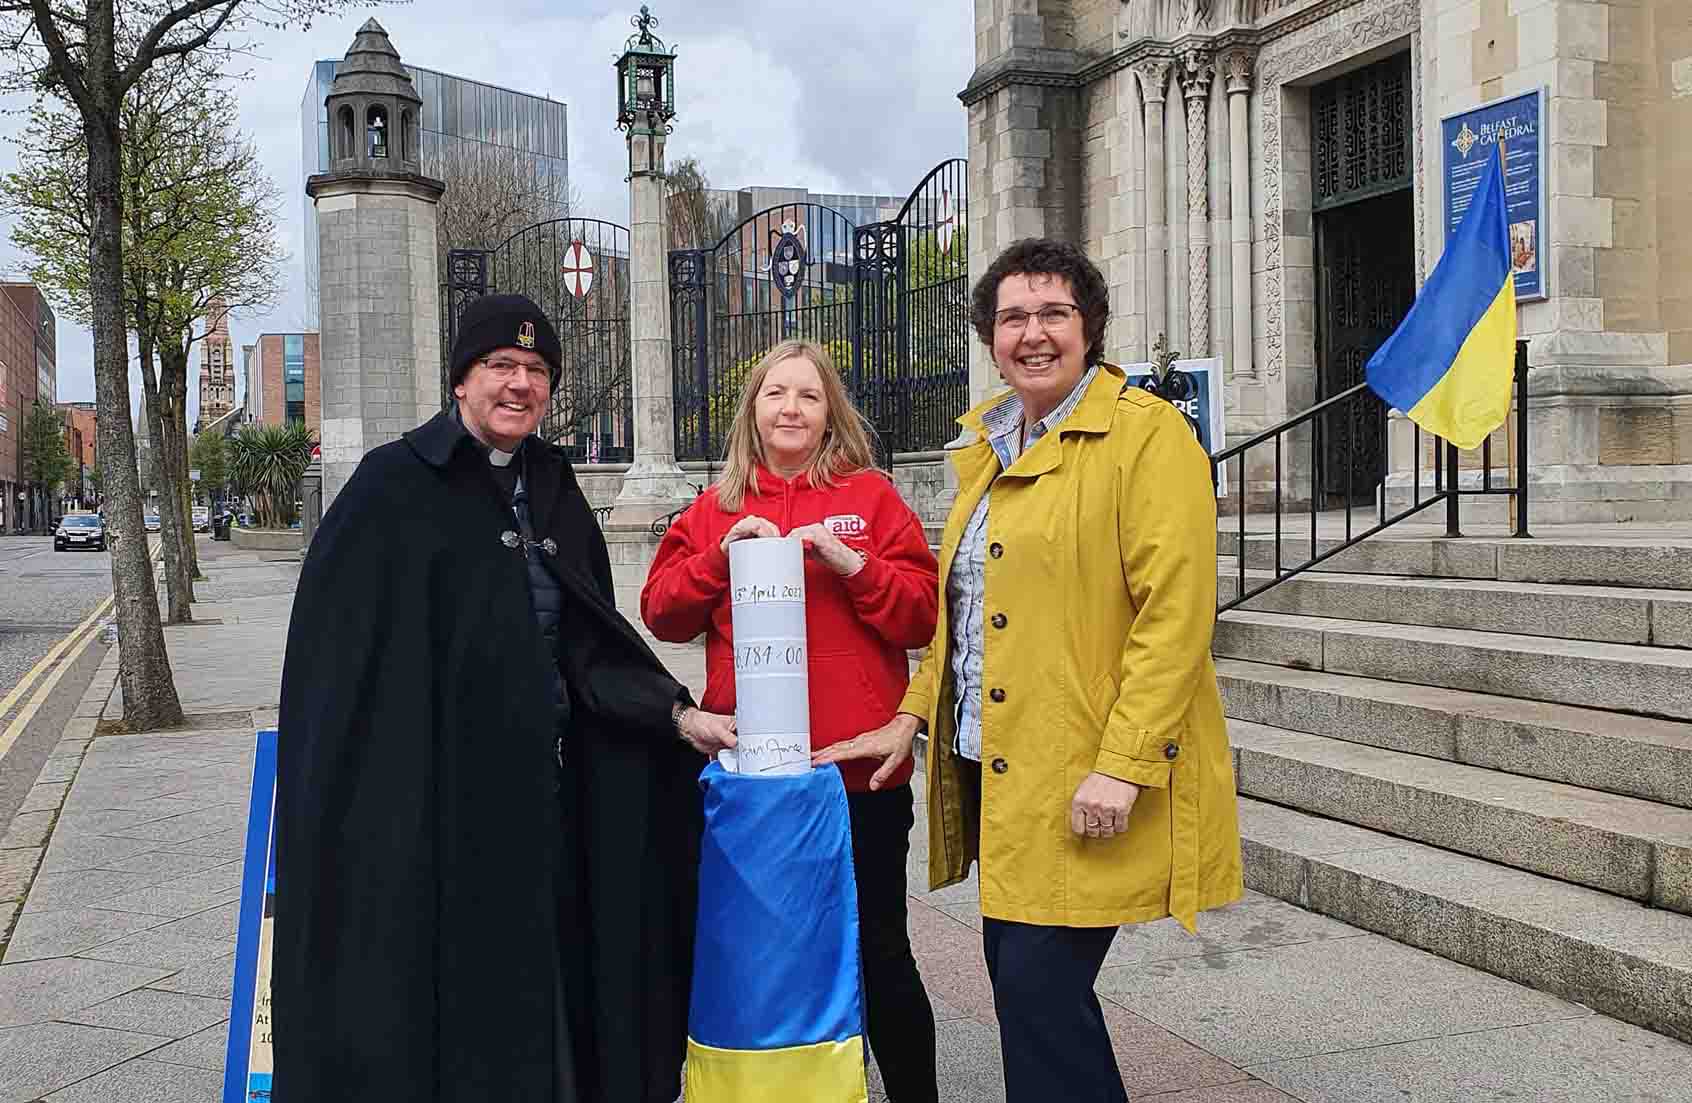 Dean Stephen Forde has presented a cheque for £56,784 to Rosamond Bennett, Chief Executive of Christian Aid Ireland, and Jenny Williams, Chief Executive of Habitat for Humanity Ireland, raised through Belfast Cathedral's special Black Santa Sit-out for Ukraine.